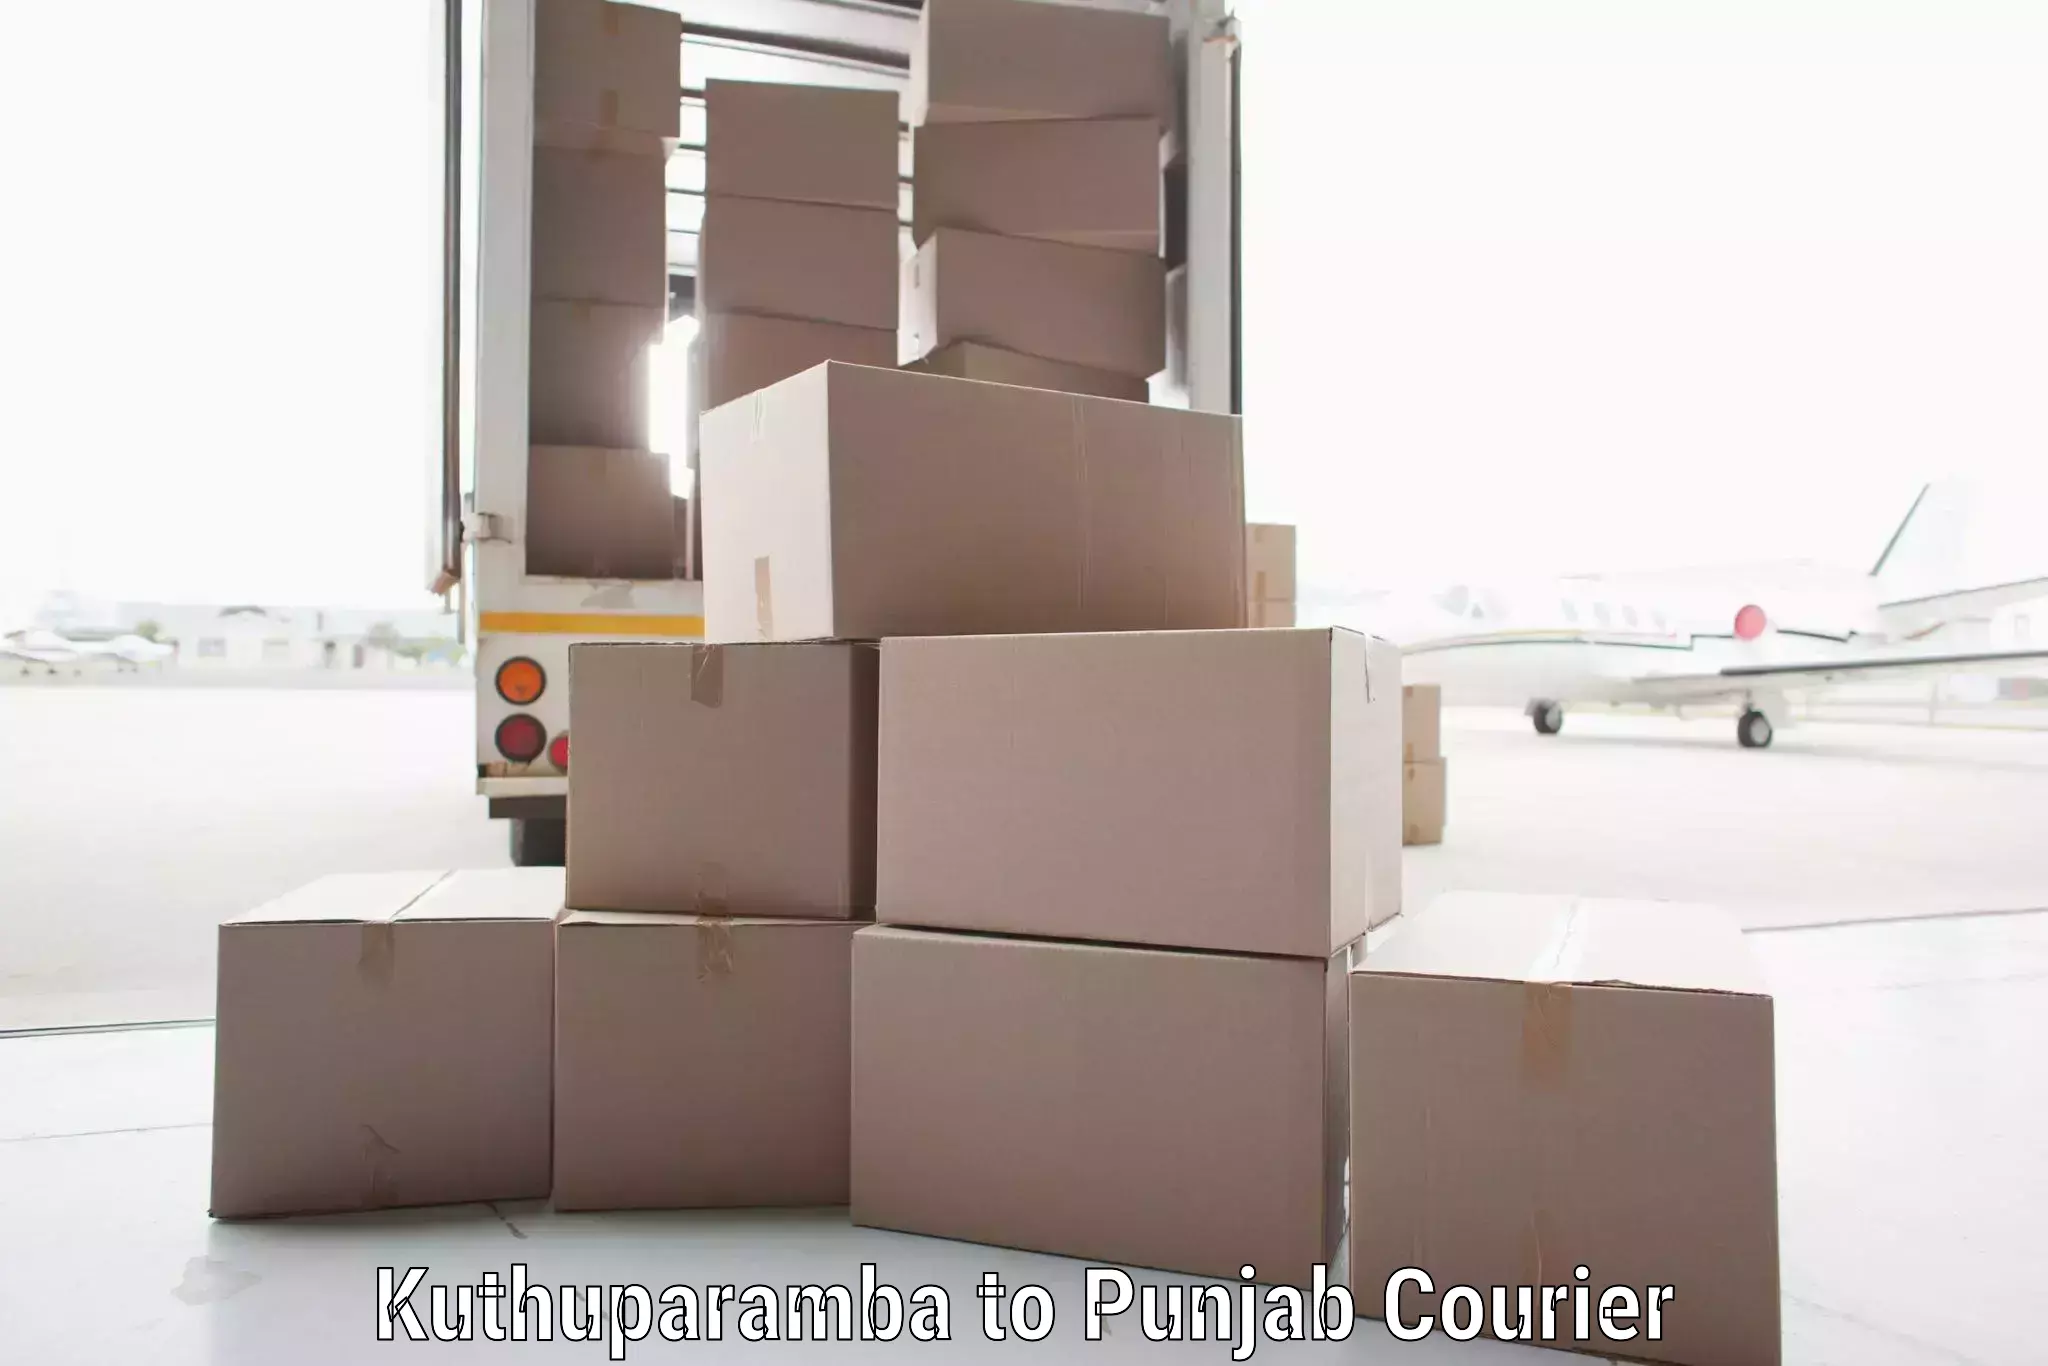 Efficient parcel delivery in Kuthuparamba to Kotkapura